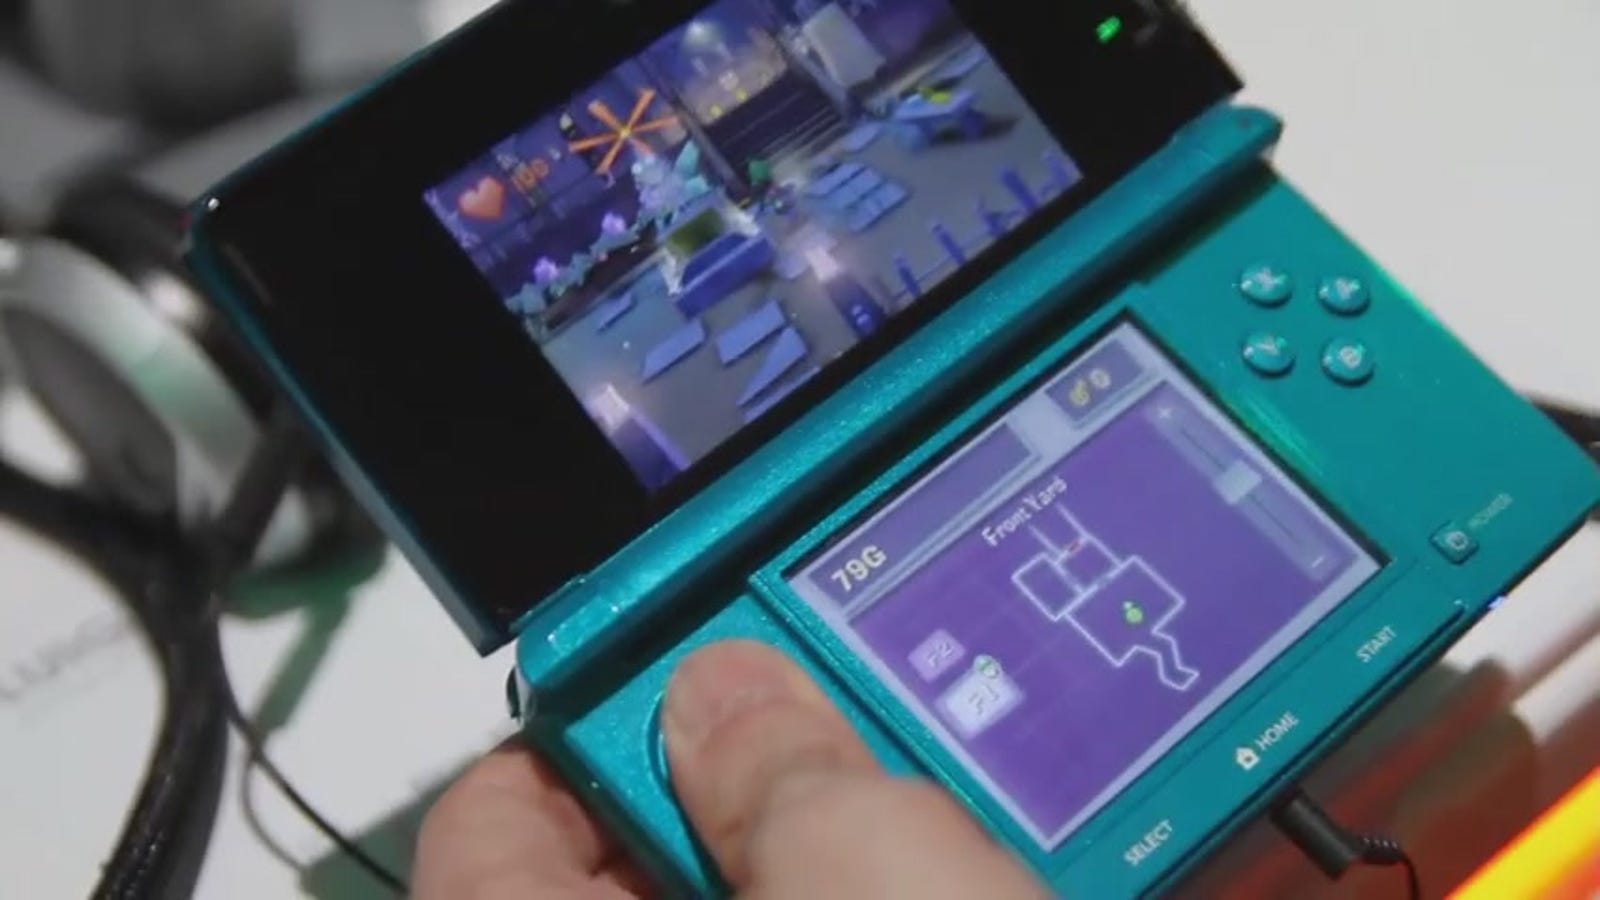 luigi-s-mansion-2-proves-the-3ds-can-handle-sequels-to-gamecube-games